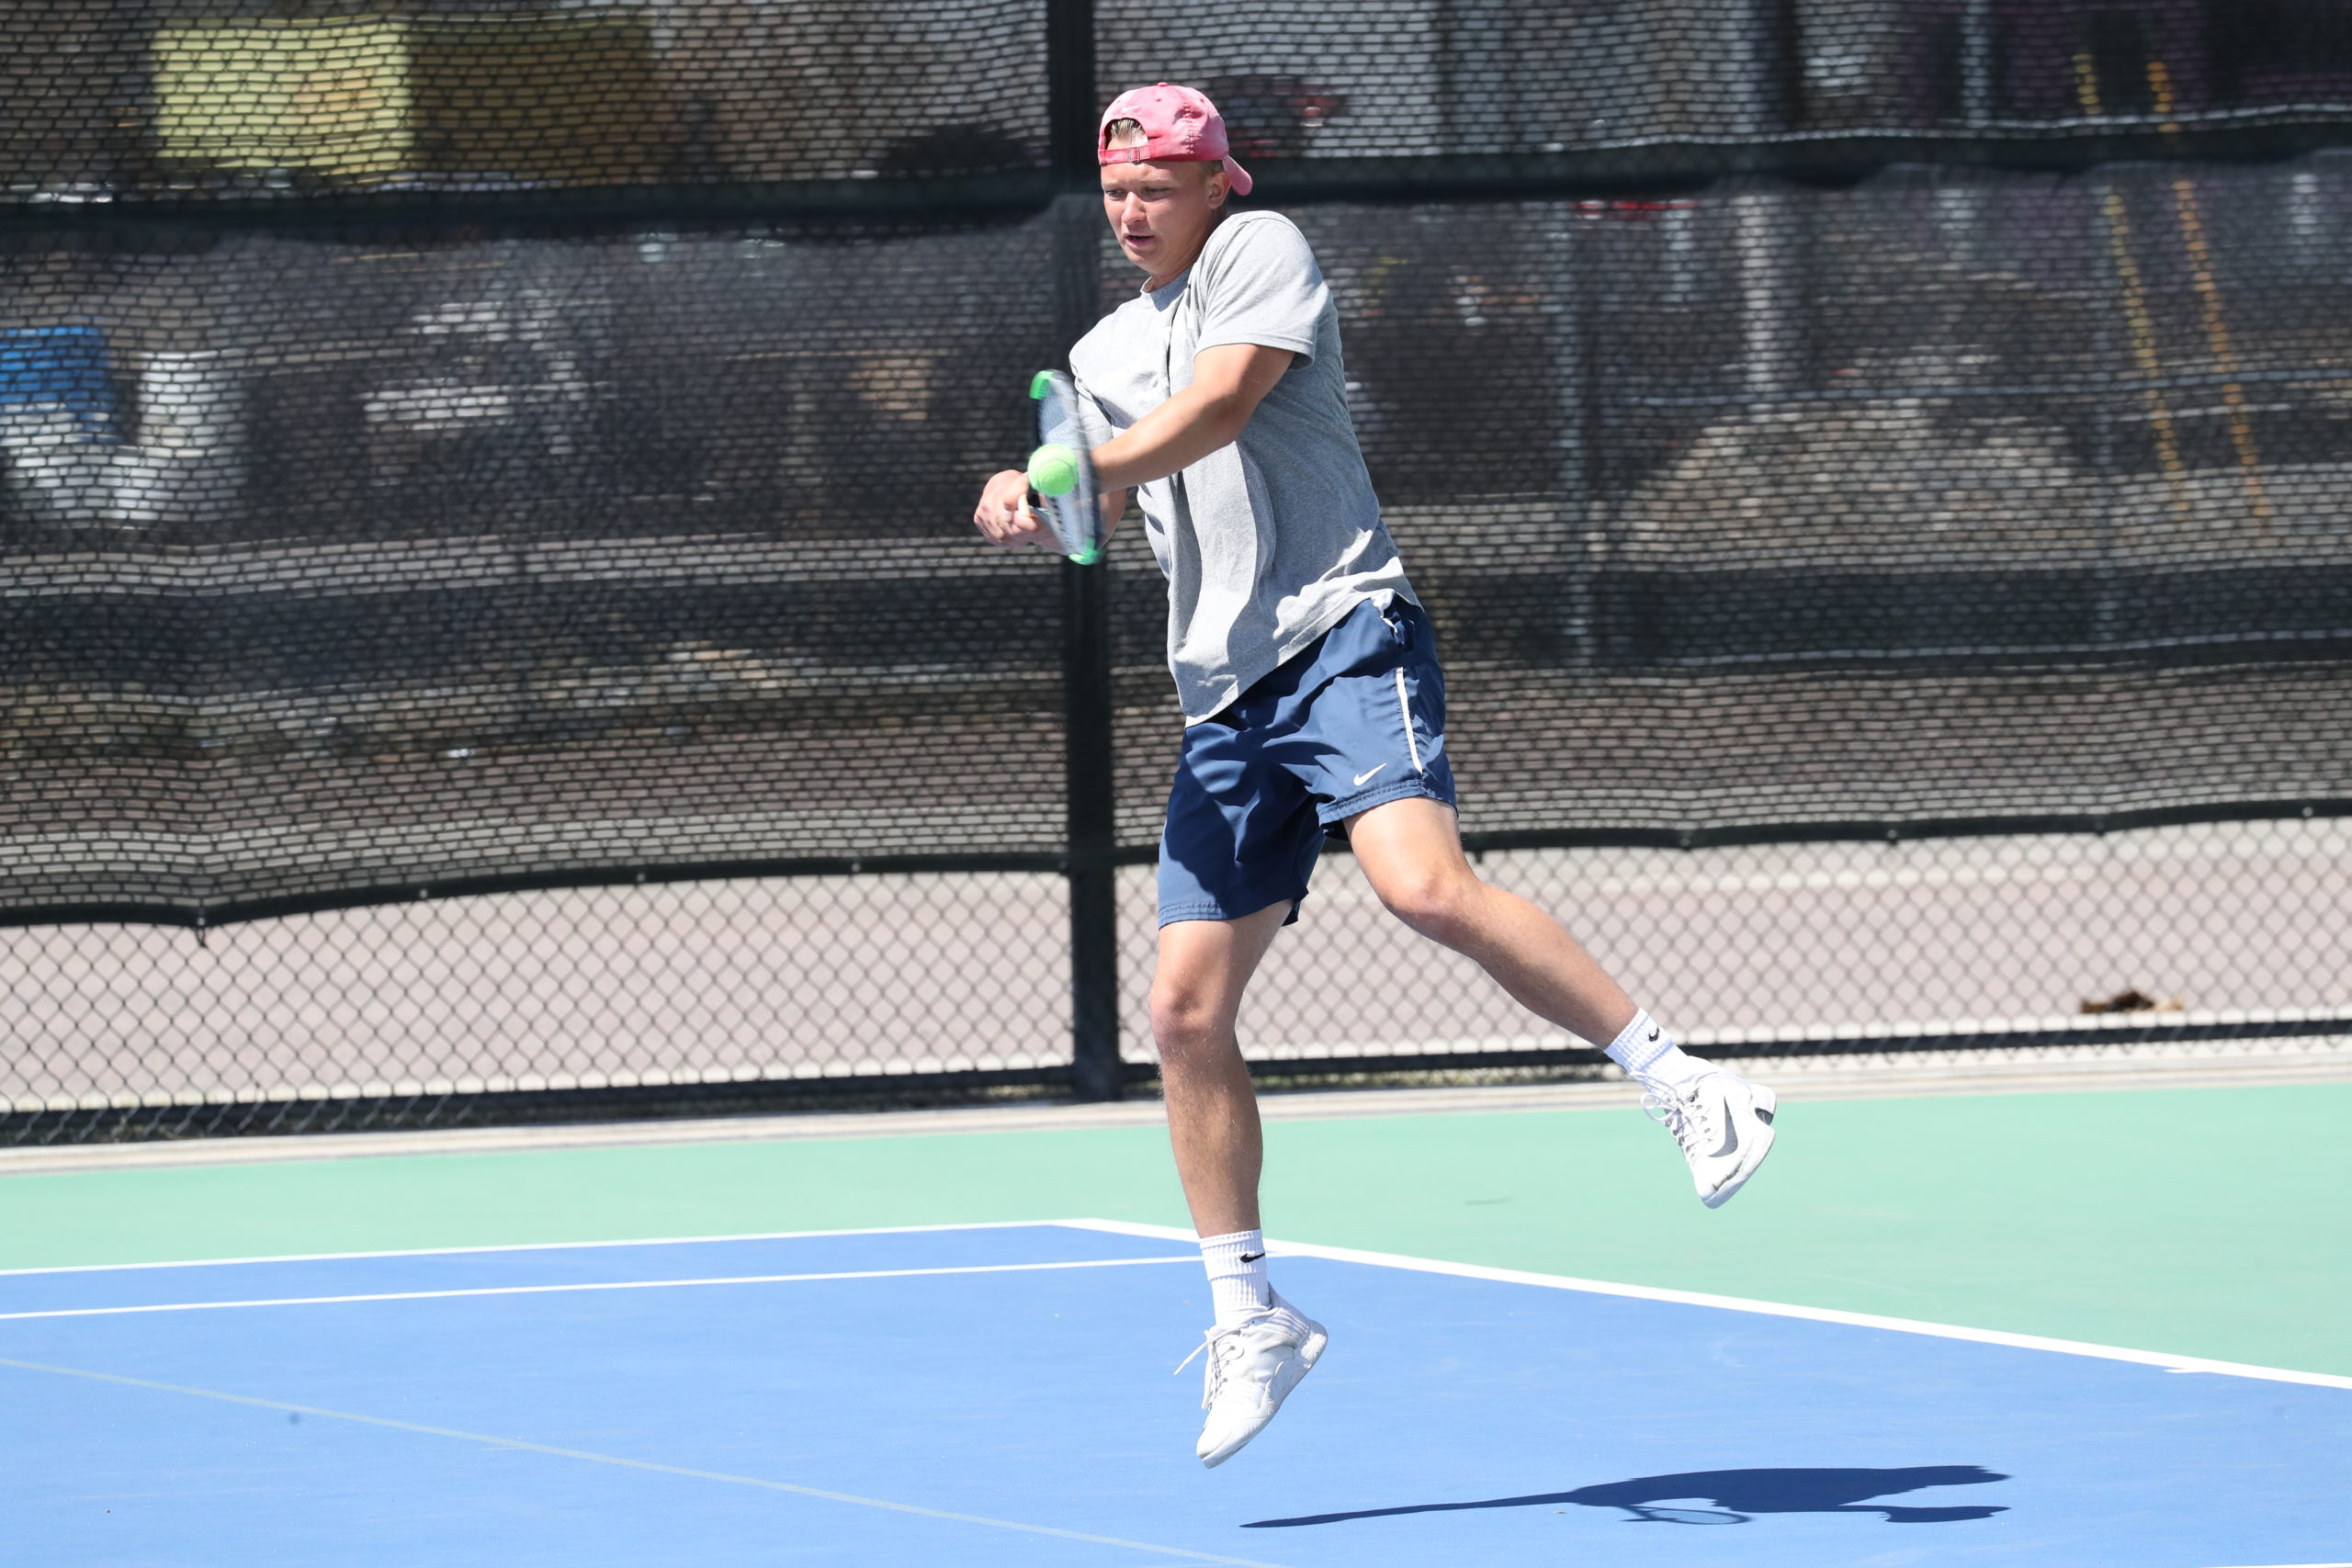 Men's tennis player David Kijak makes contact on a back-handed shot during a match in 2022.